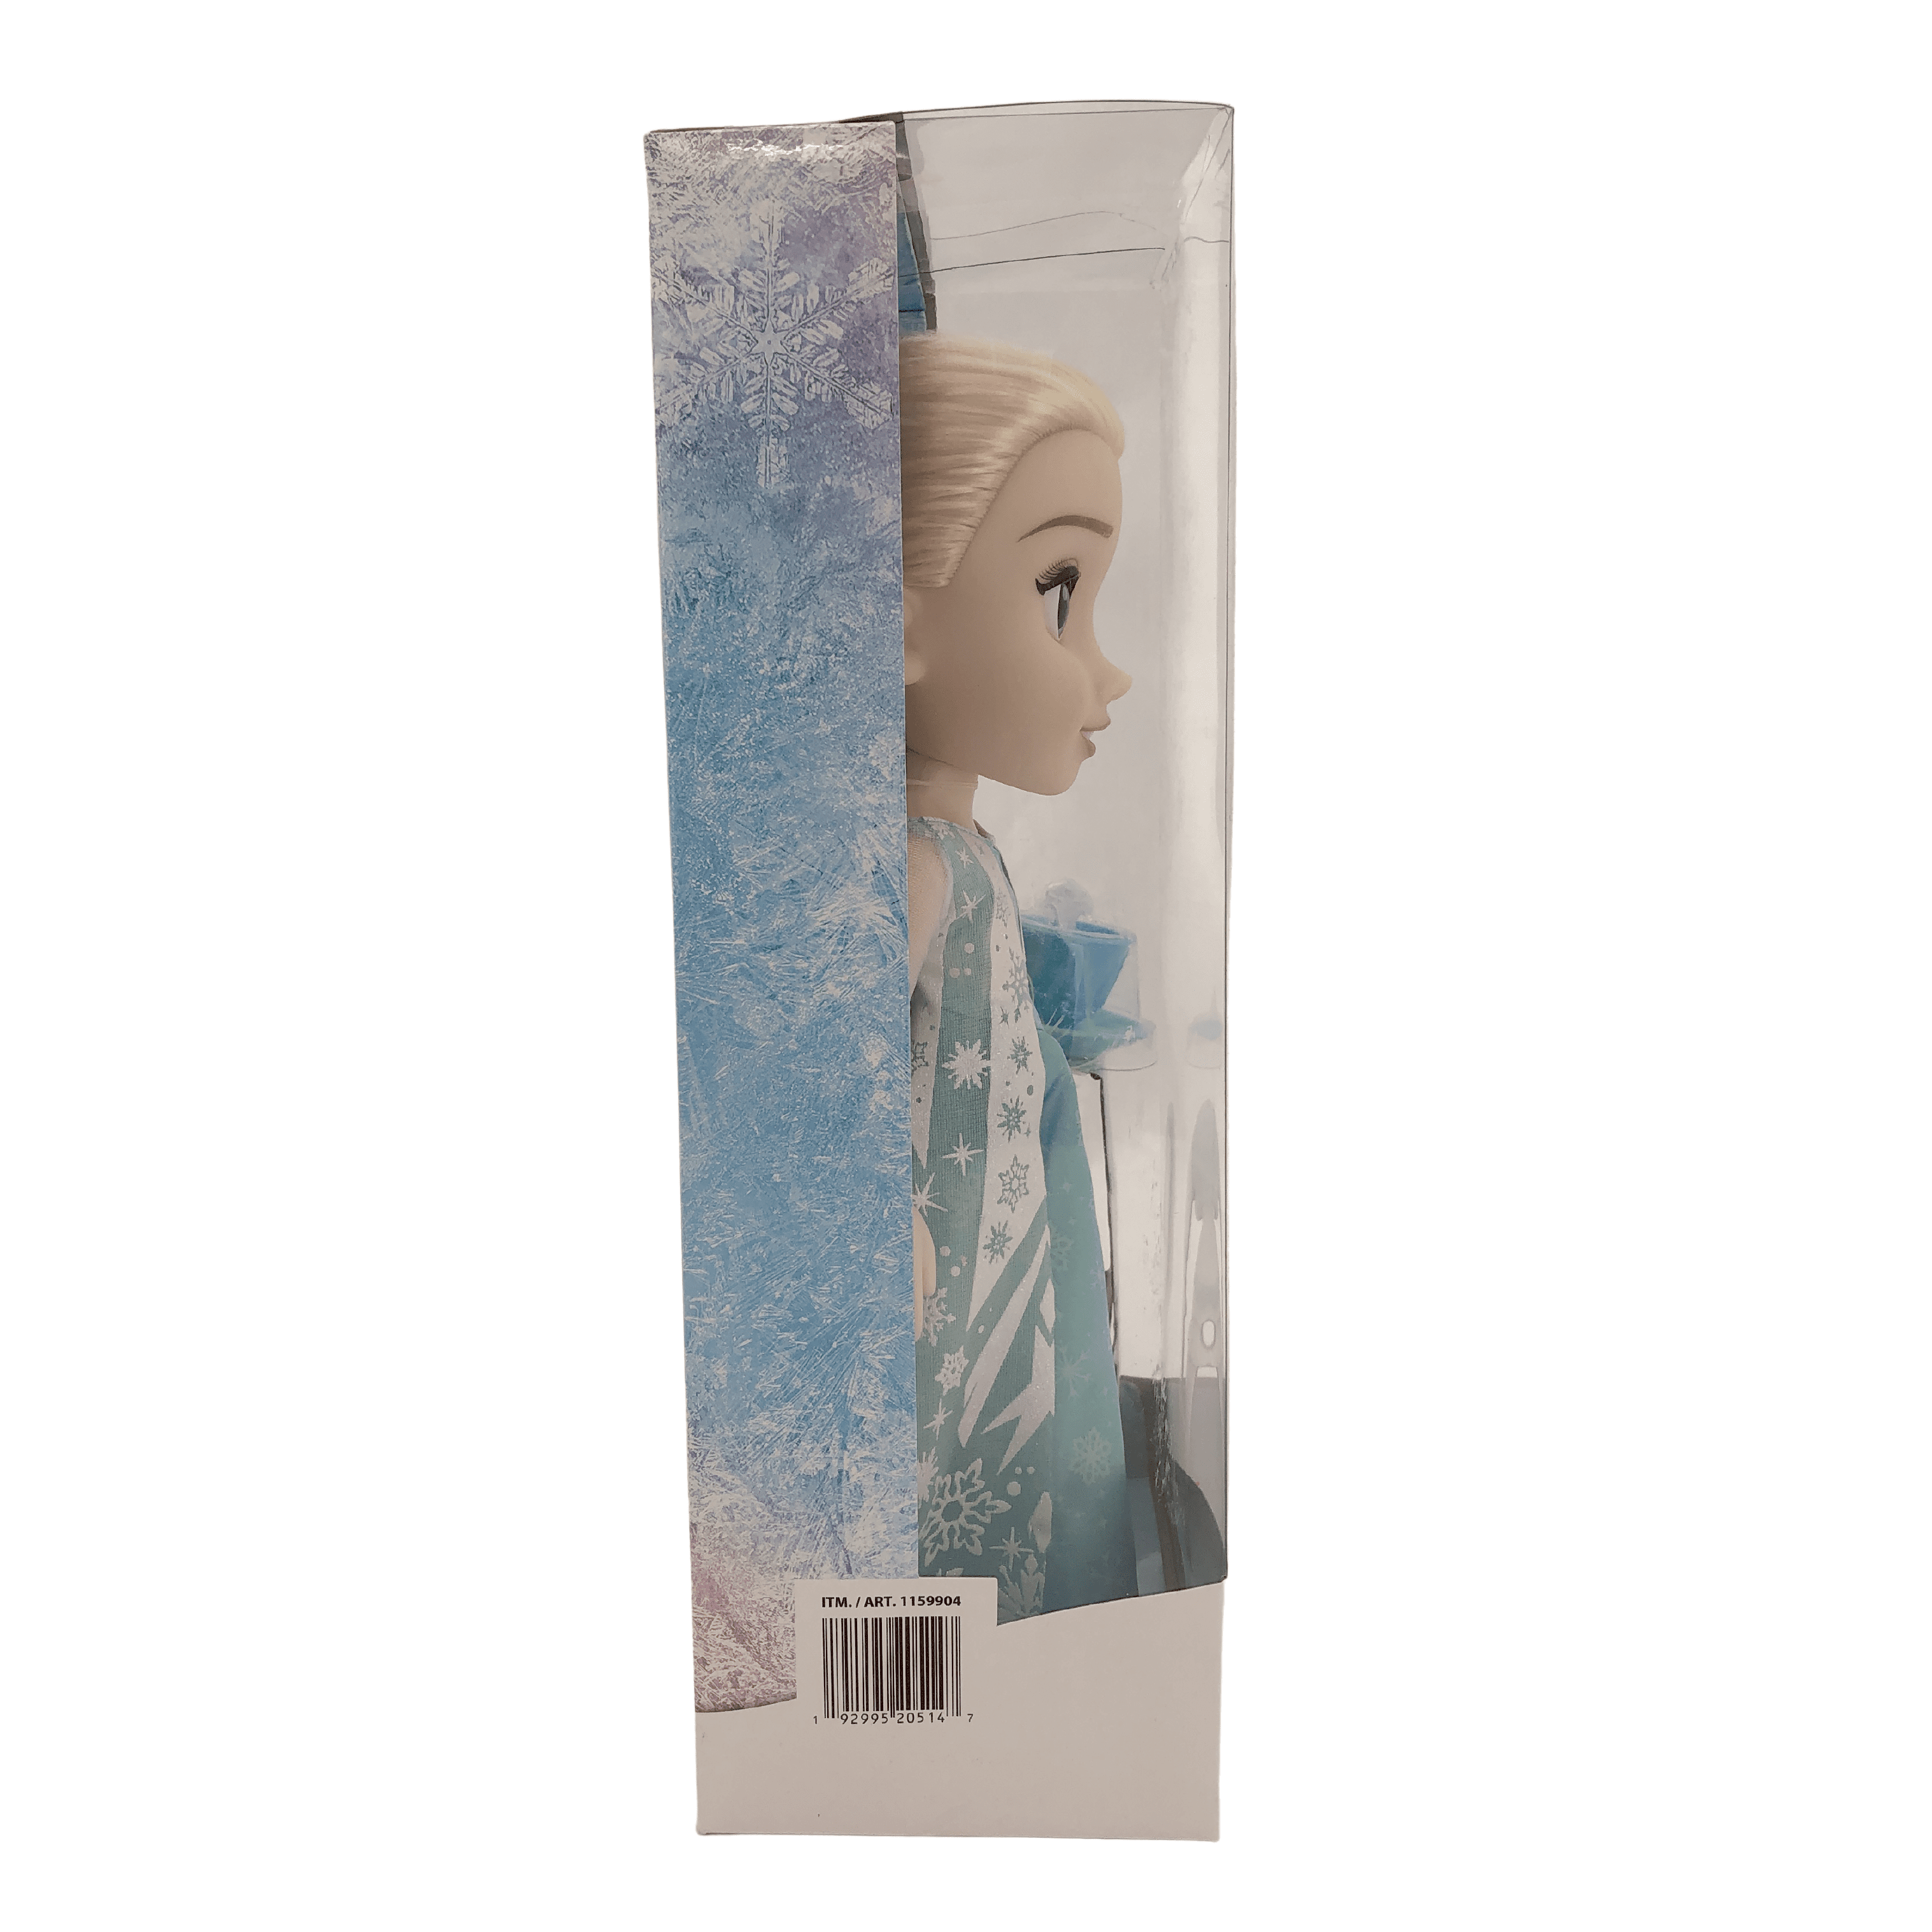 Disney Frozen Tea Time with Elsa and Olaf **DEALS**